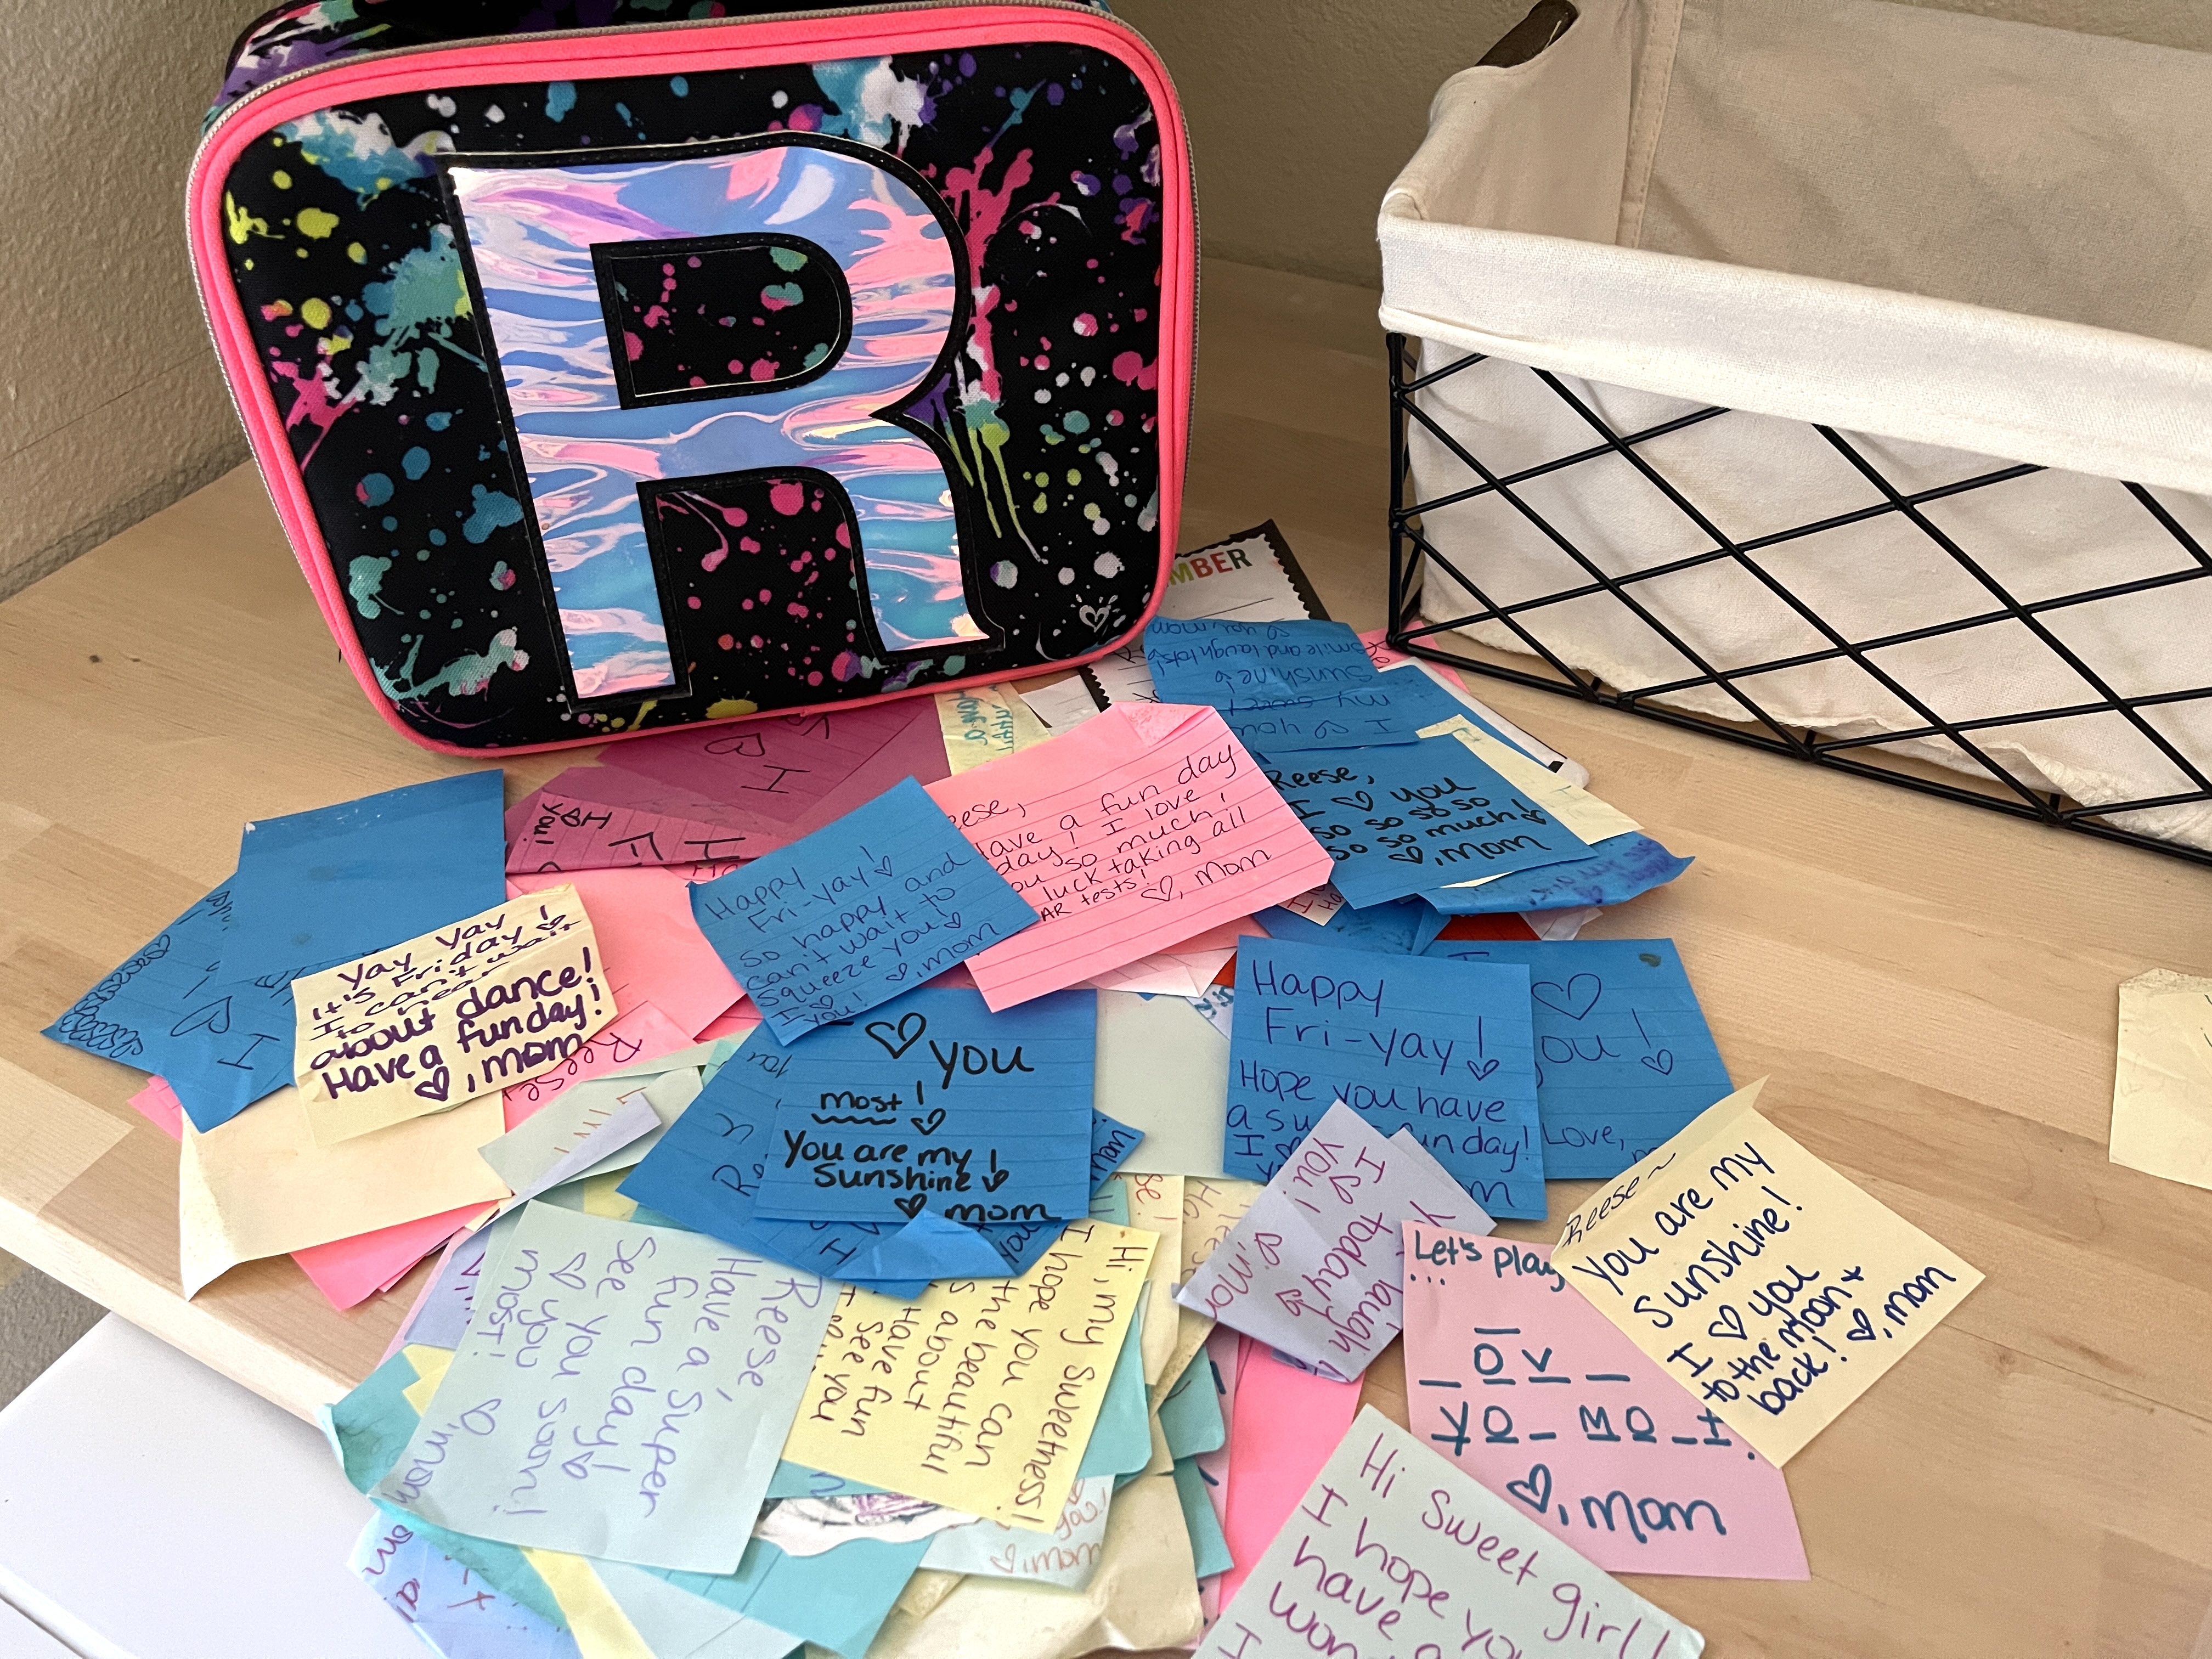 Lunch Box Love Notes – are they sweet or a bit much? (Read through for a free surprise!)